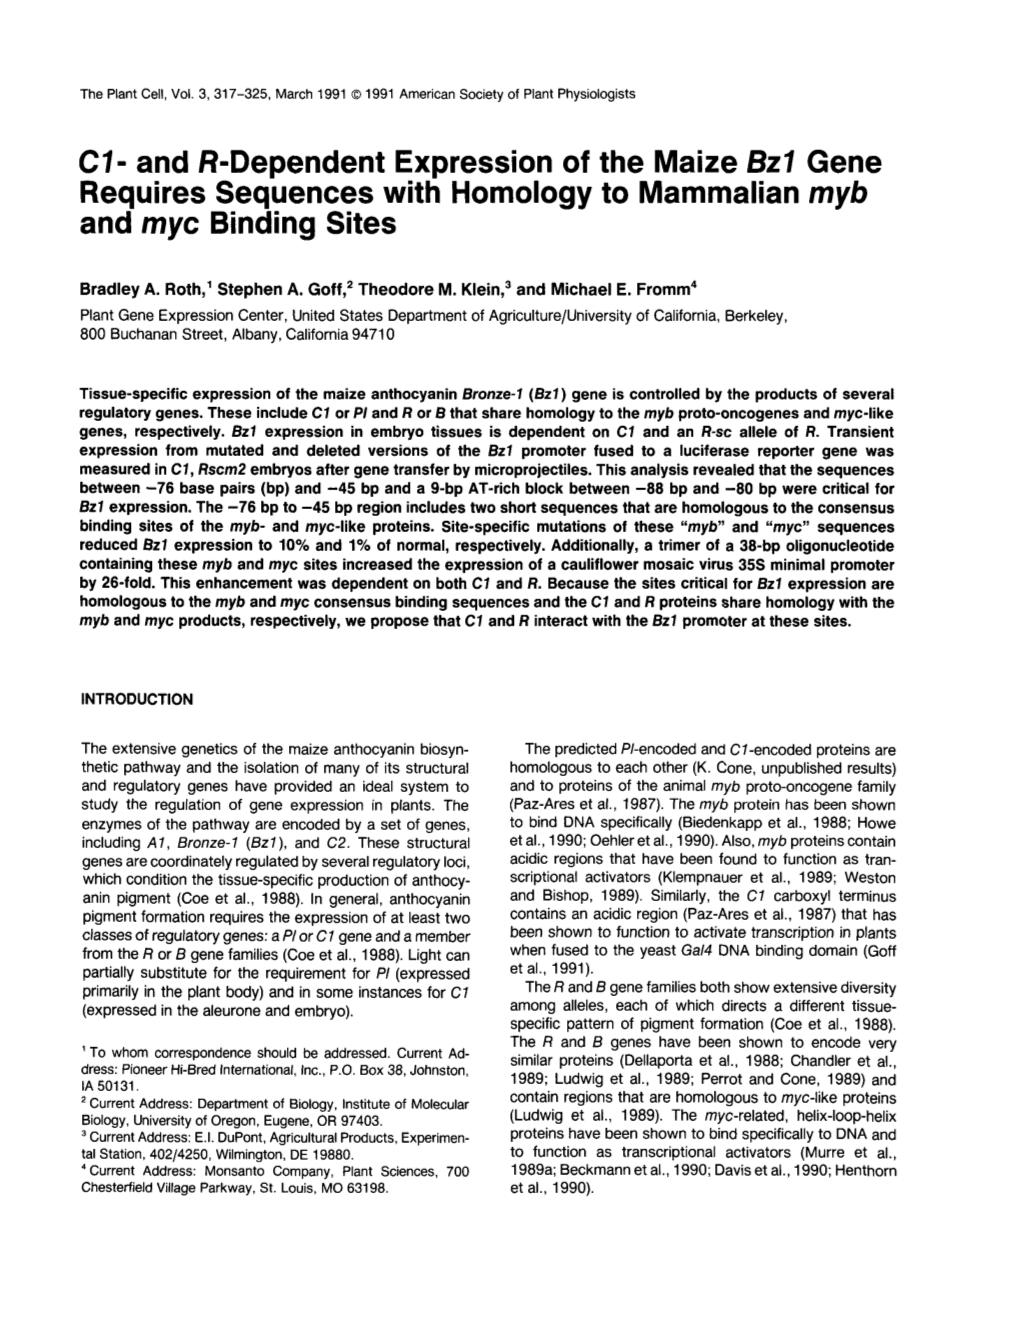 And R-Dependent Expression of the Maize Bzi Gene Requires Sequences with Homology to Mammalian Myb and Myc Binding Sites